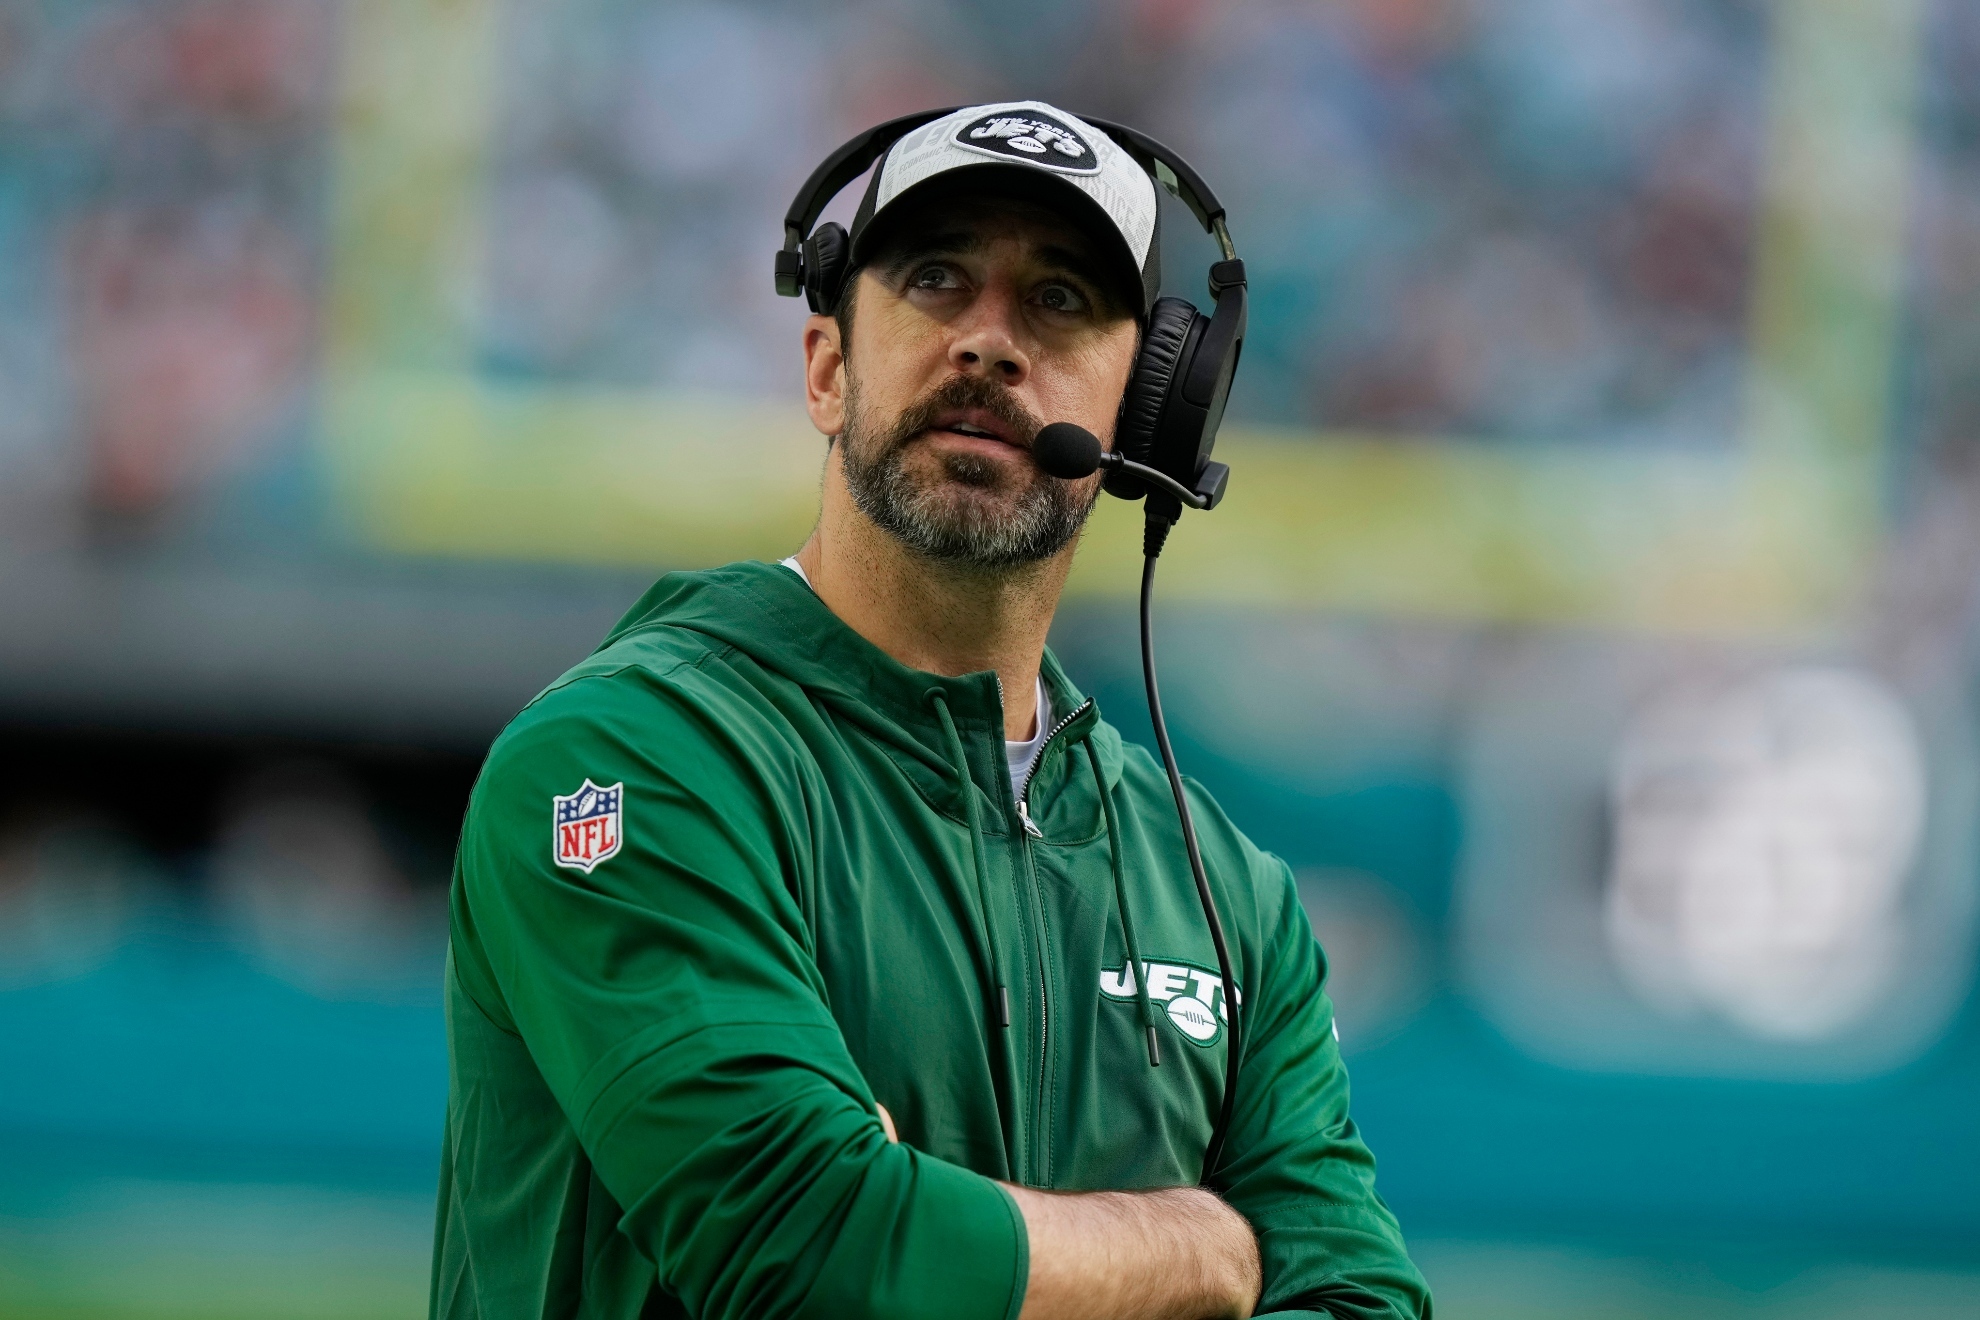 Aaron Rodgers atthe New York Jets